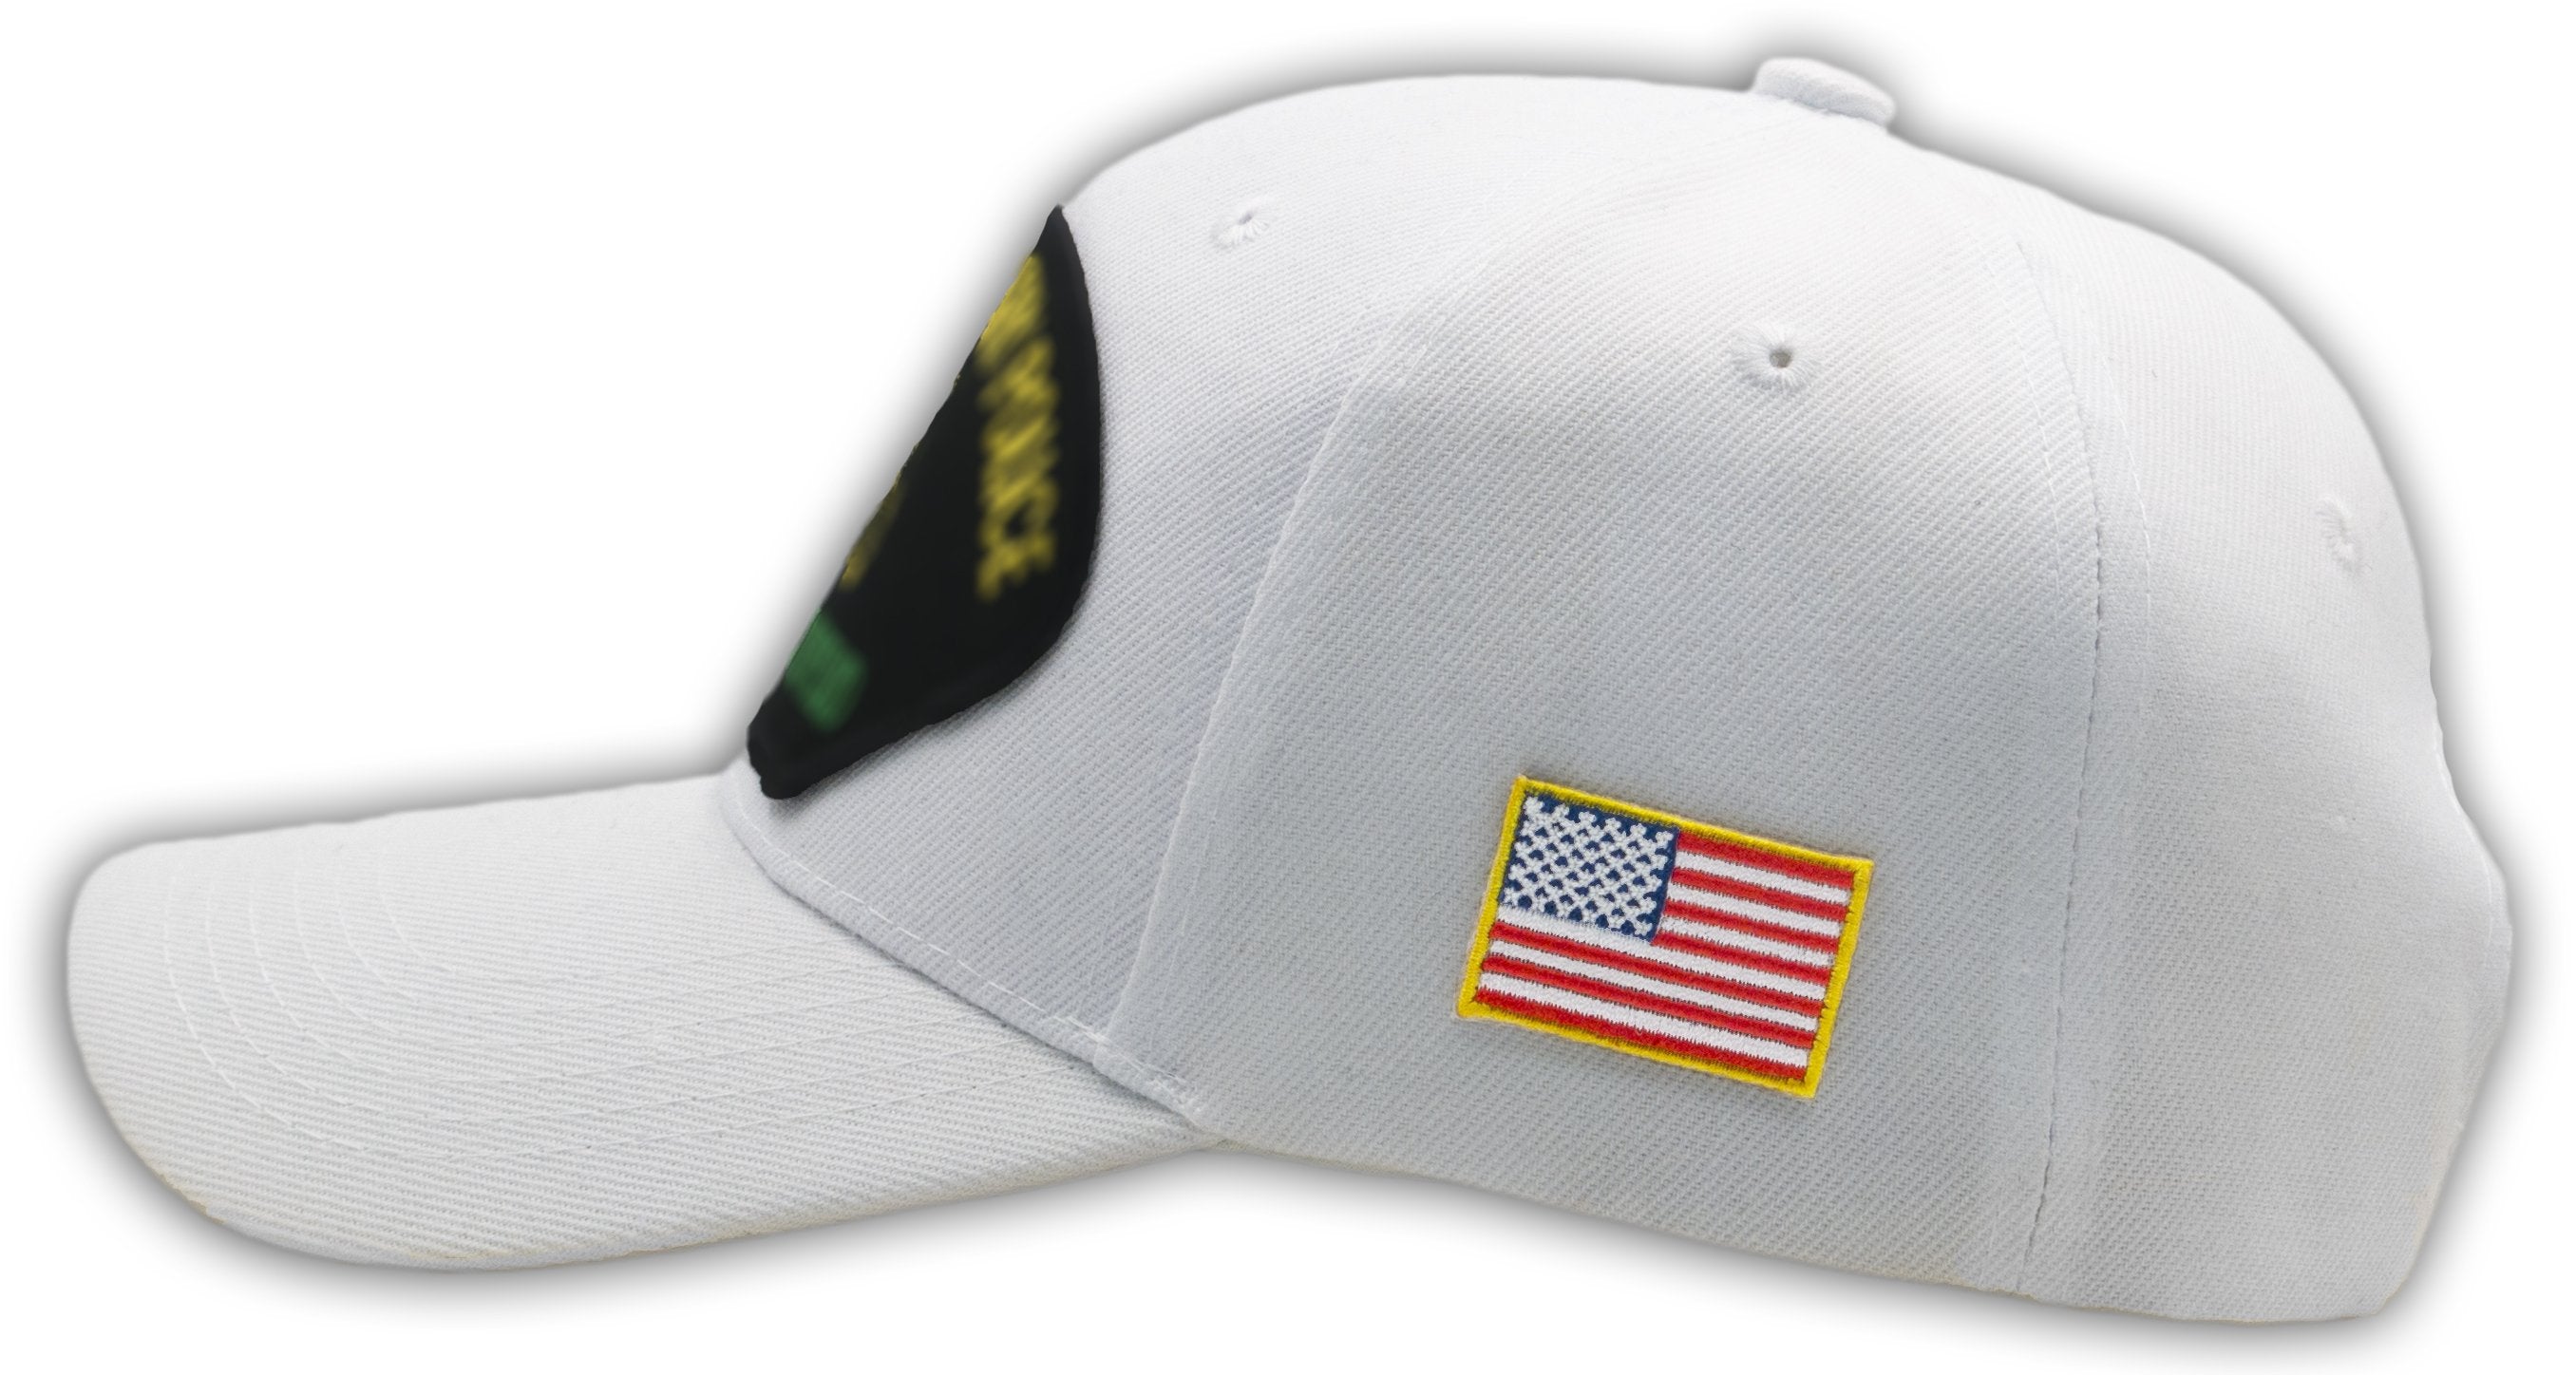 US Marine Corps Dad  Hat - Multiple Colors Available